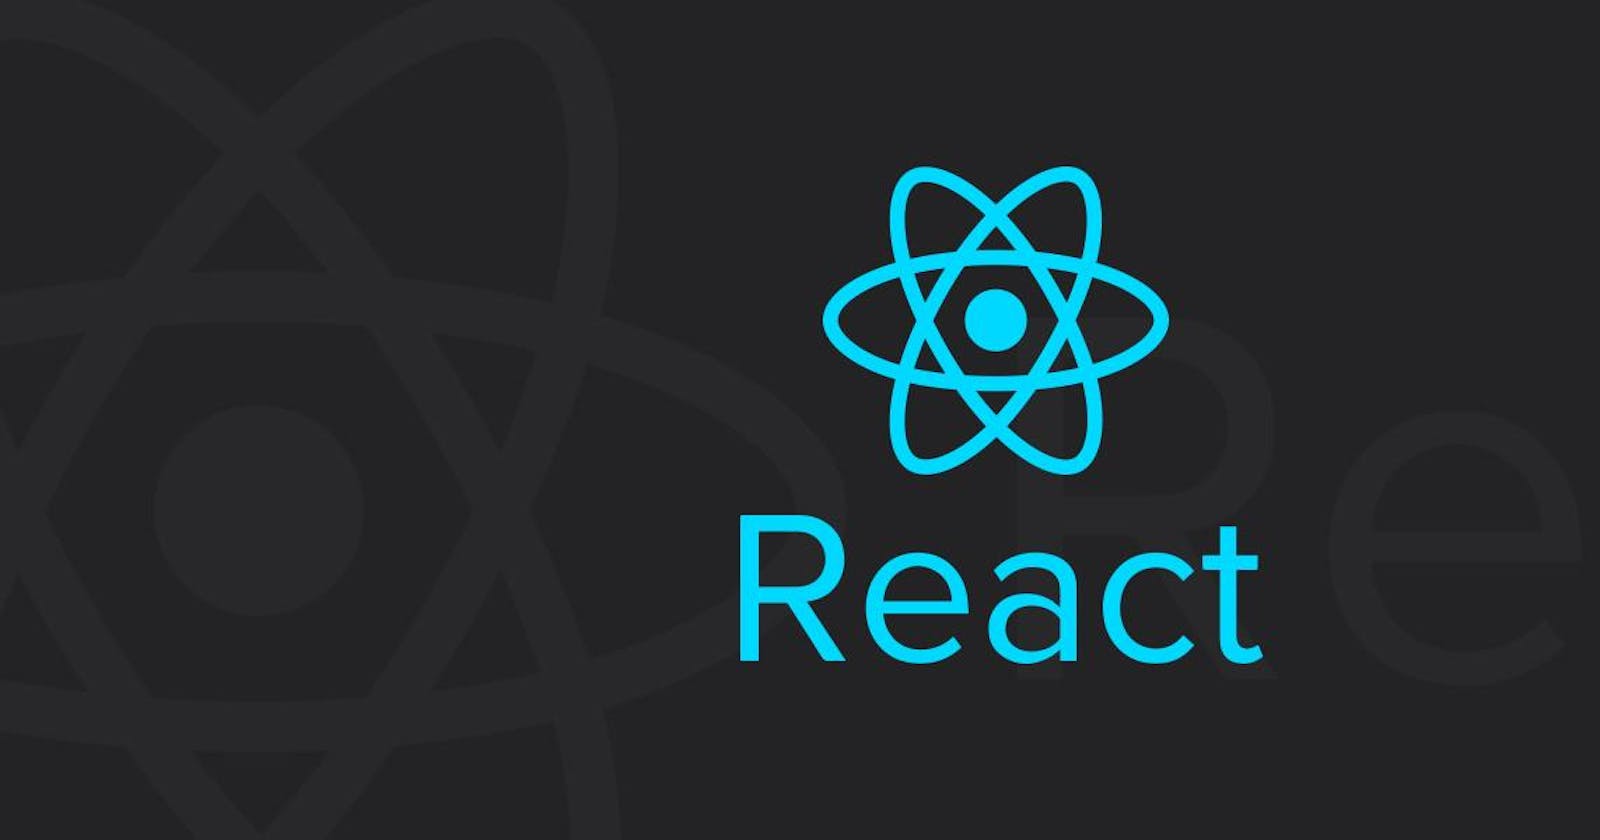 React.js, Here are some facts you should be aware of.